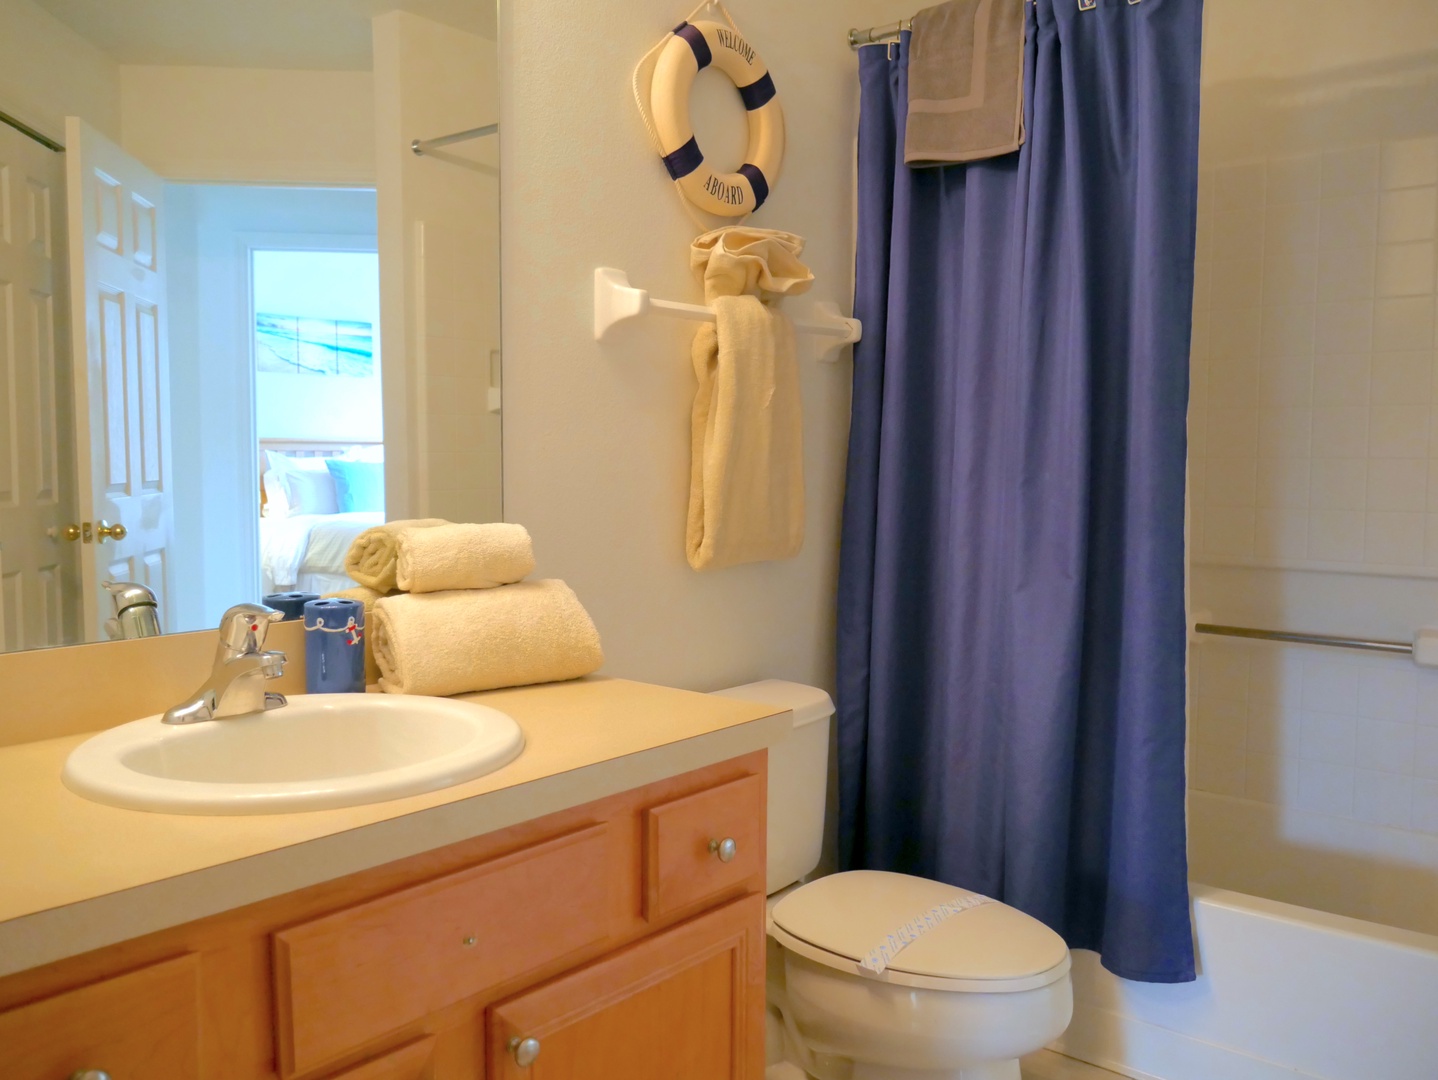 2nd bathroom with shower tub combo